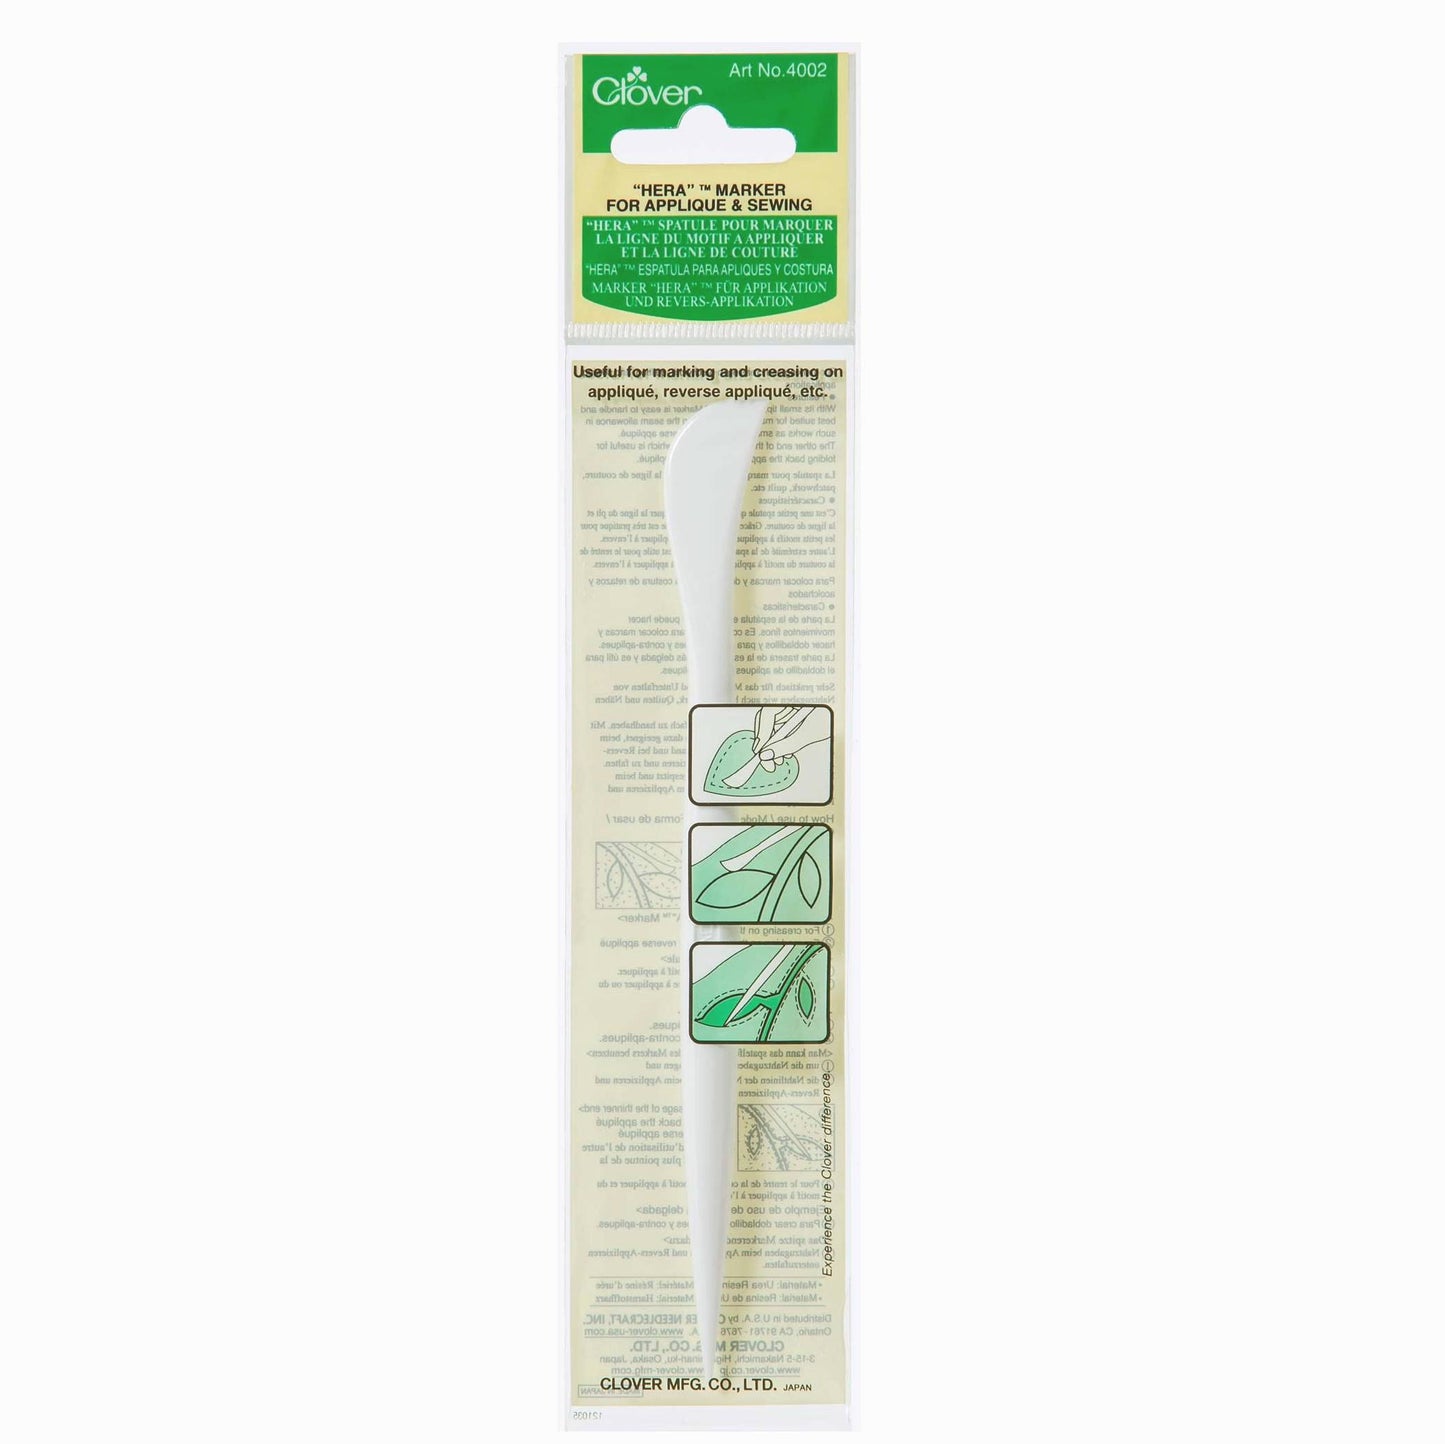 Clover Hera marker for applique and sewing fabric patchwork craft